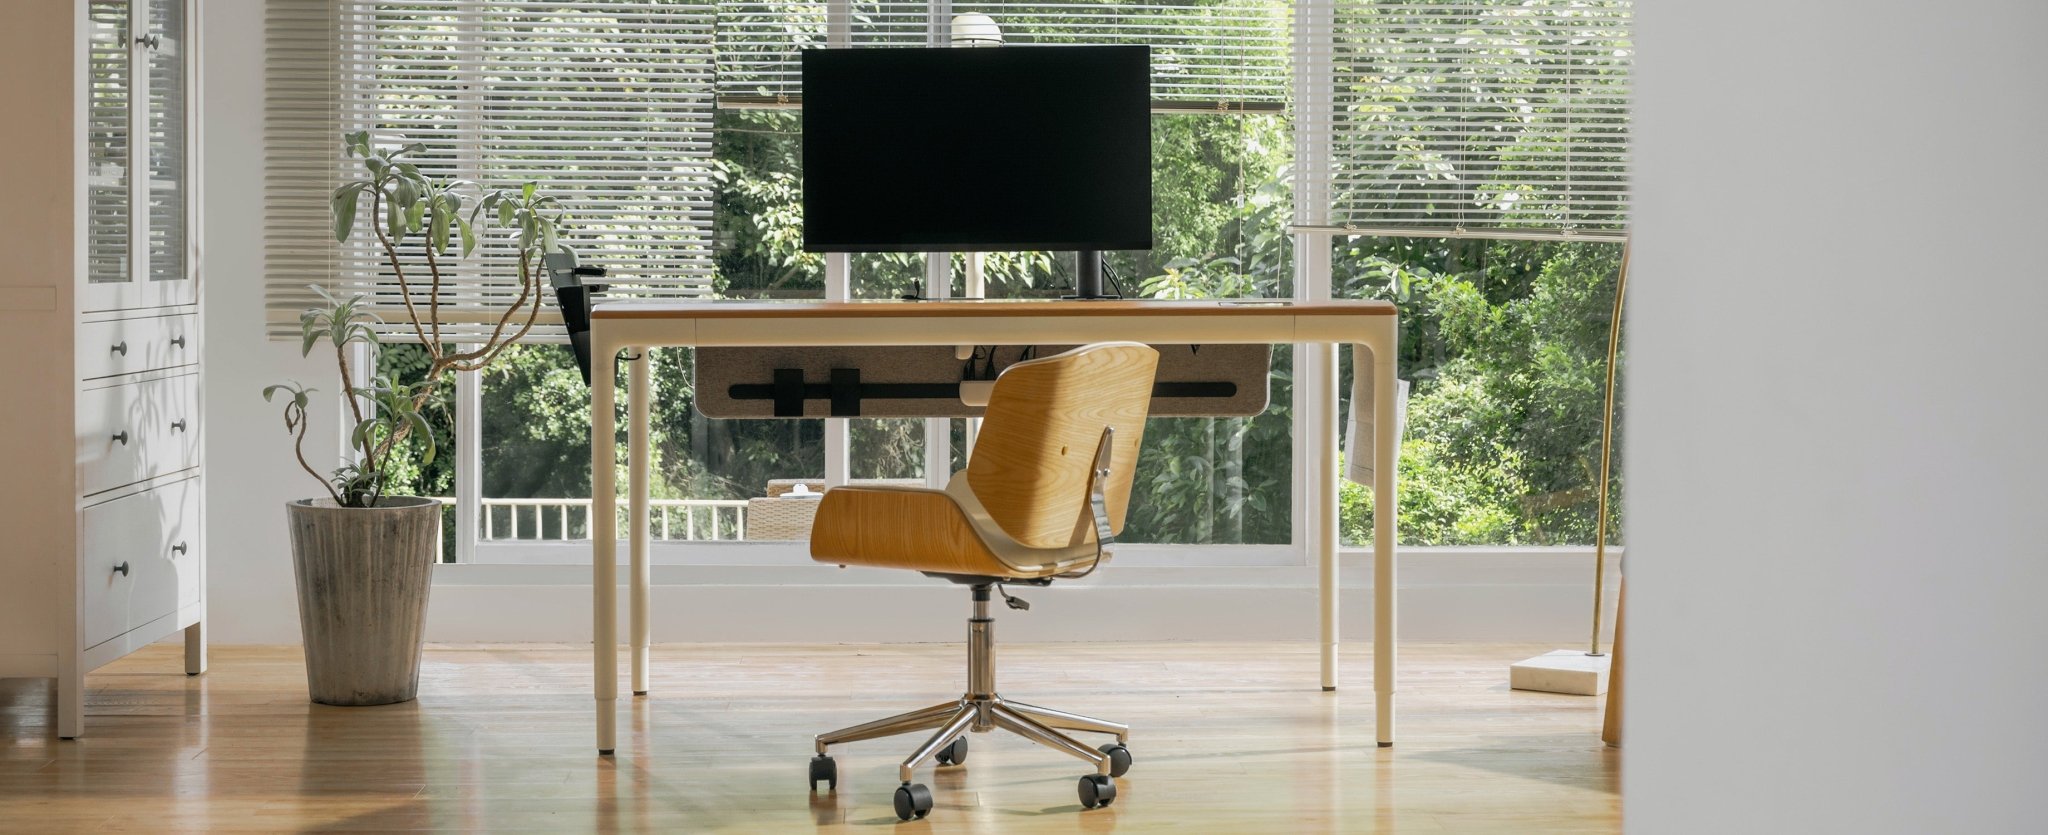 The Latest Trends in Home Office Design - Beflo